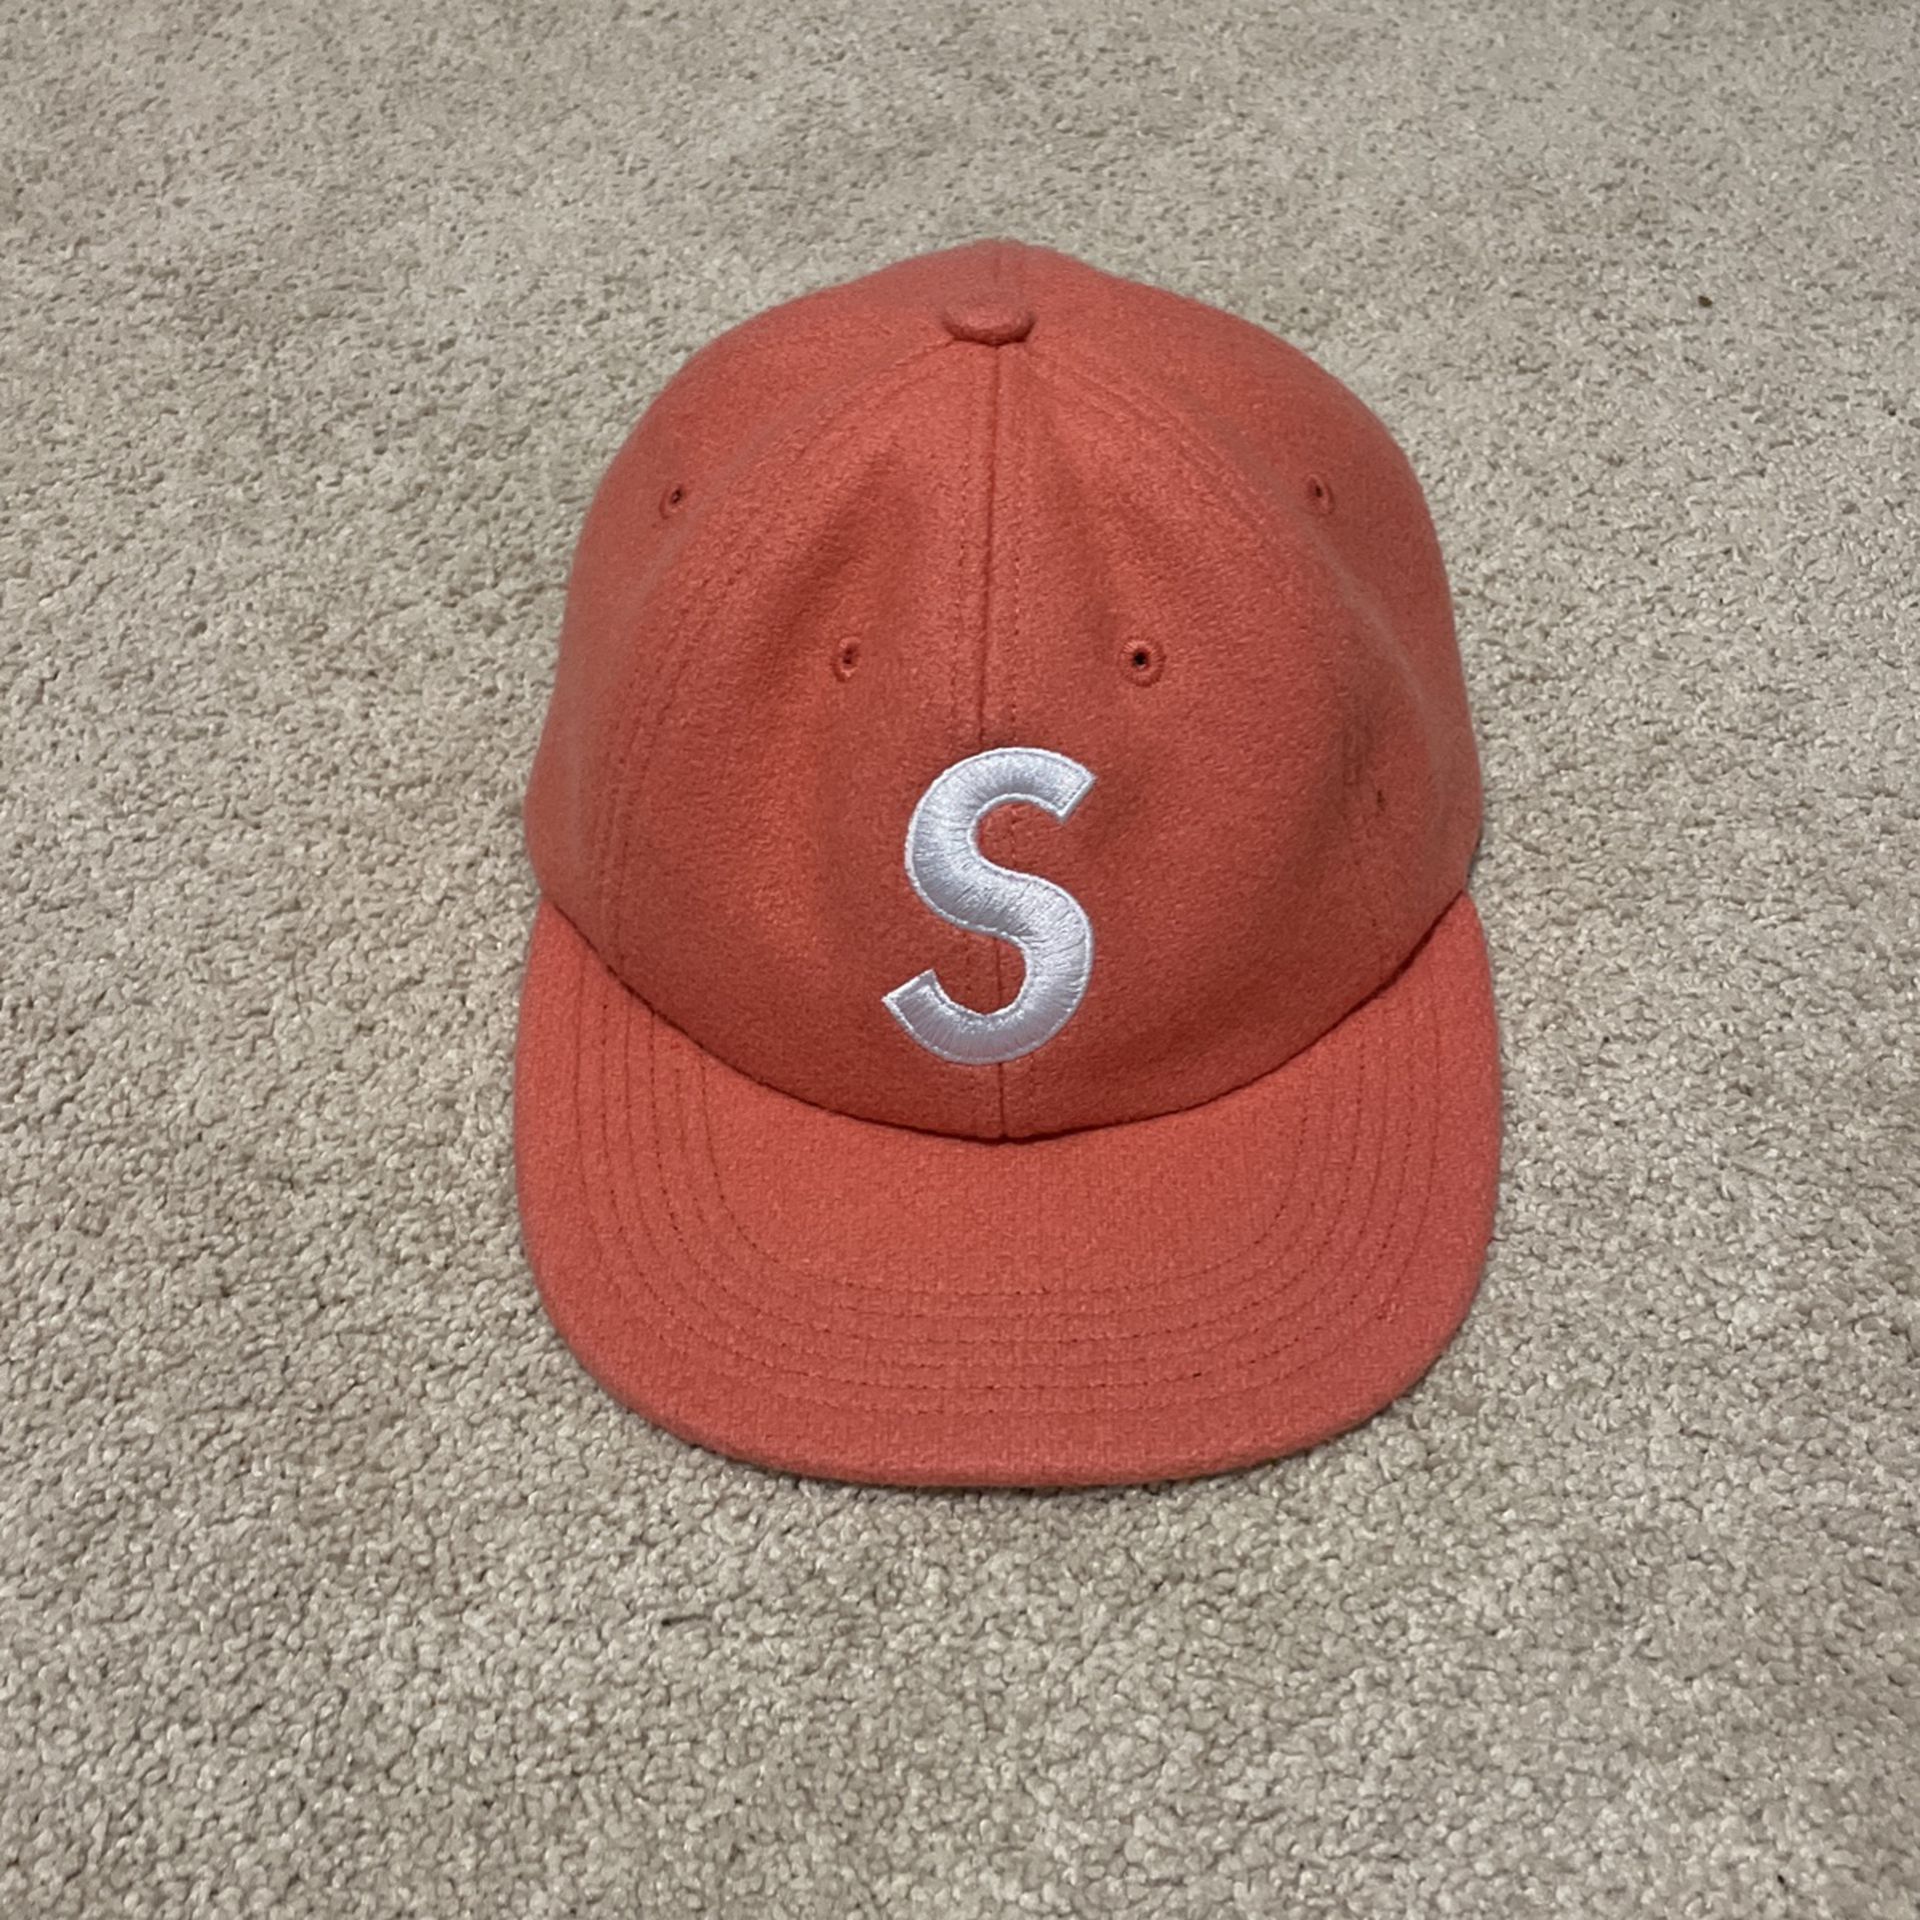 Supreme Wool Hat WITH BAG - Worn Once